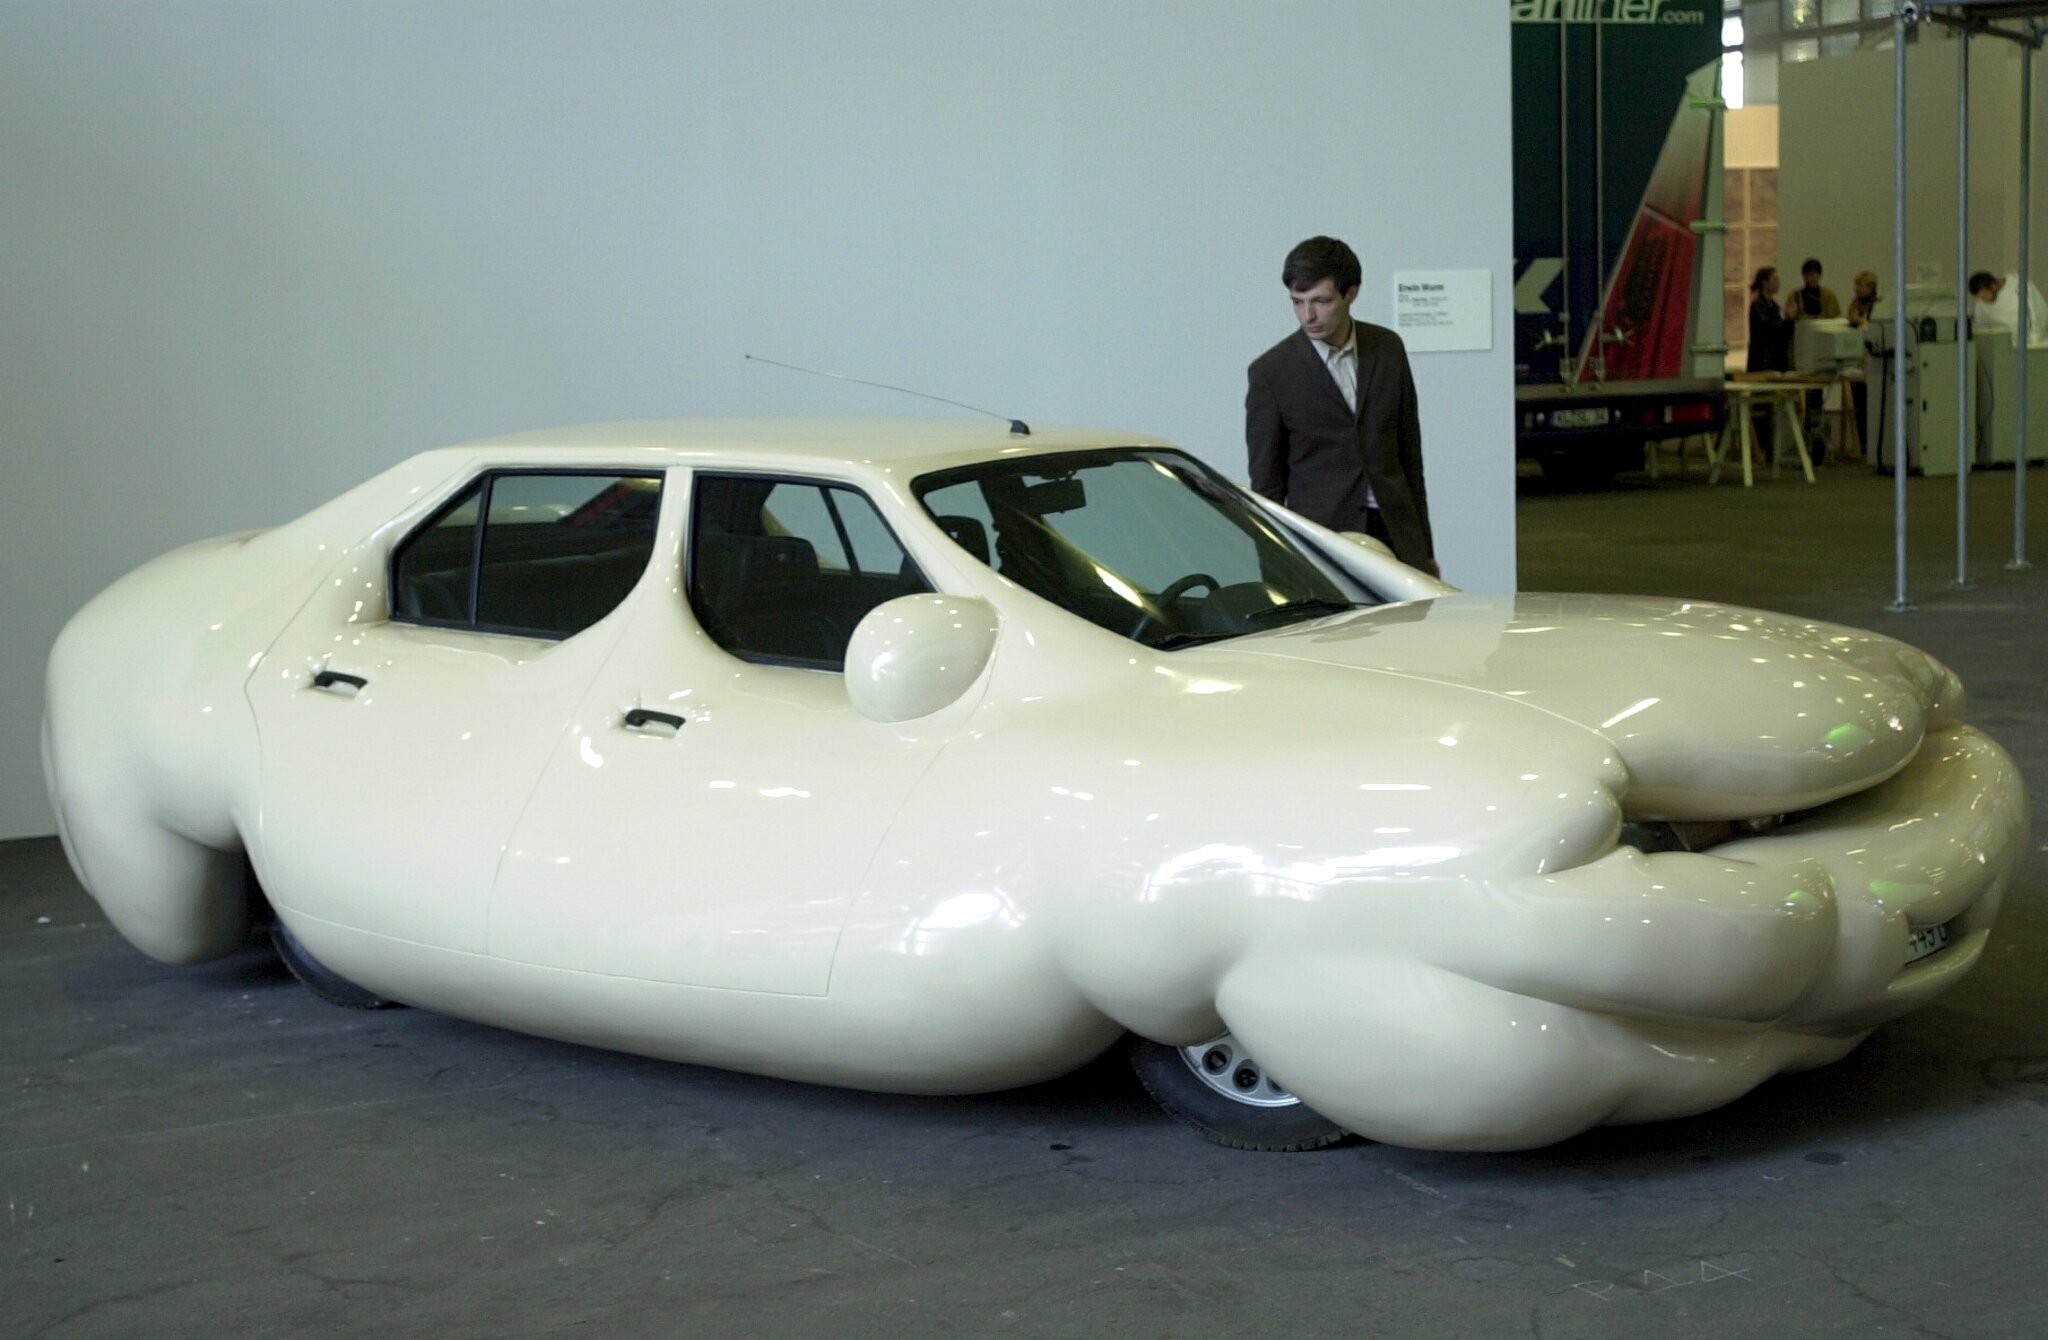 Erwin Wurm’s Fat Cars Will Make You Really Uncomfortable